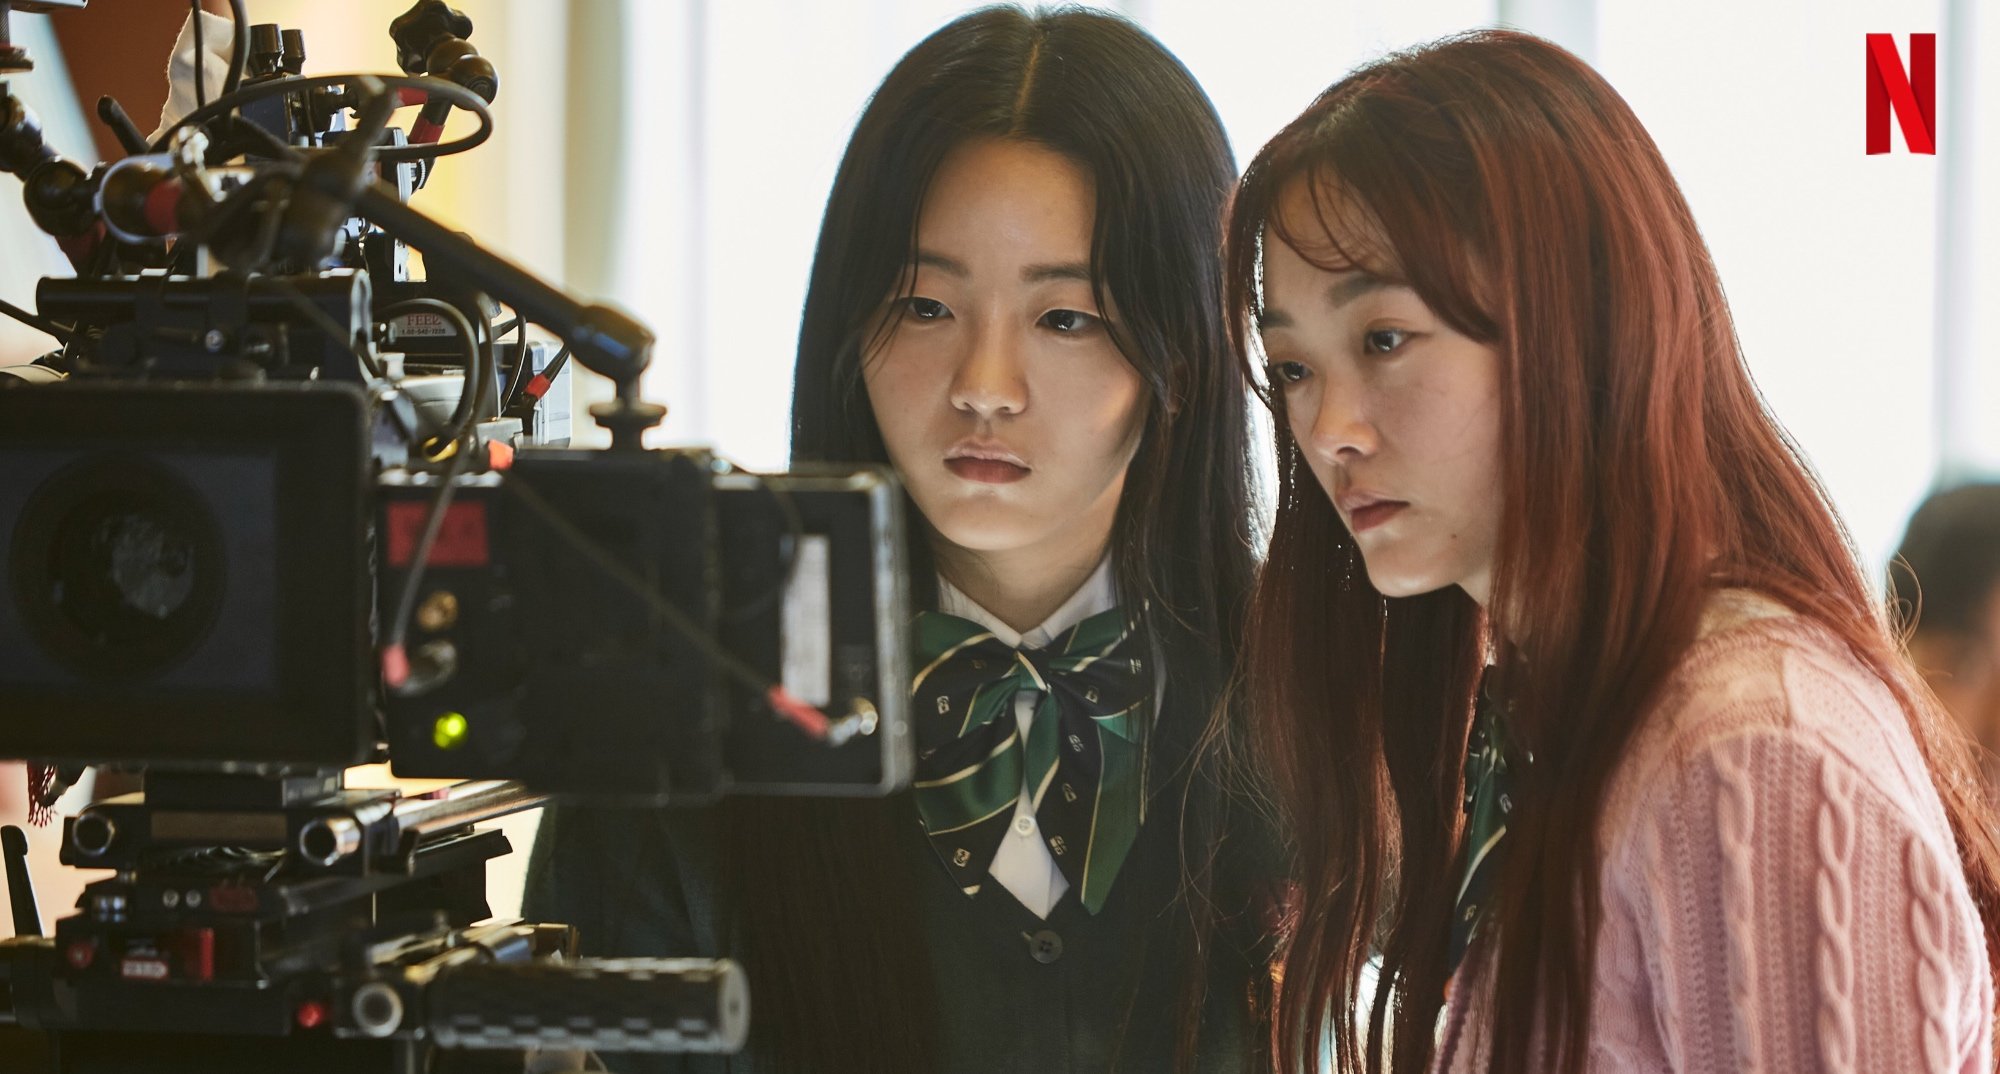 Actors Cho Yi-hyun and Lee Yoo-mi in 'All of Us Are Dead' looking at camera monitor.